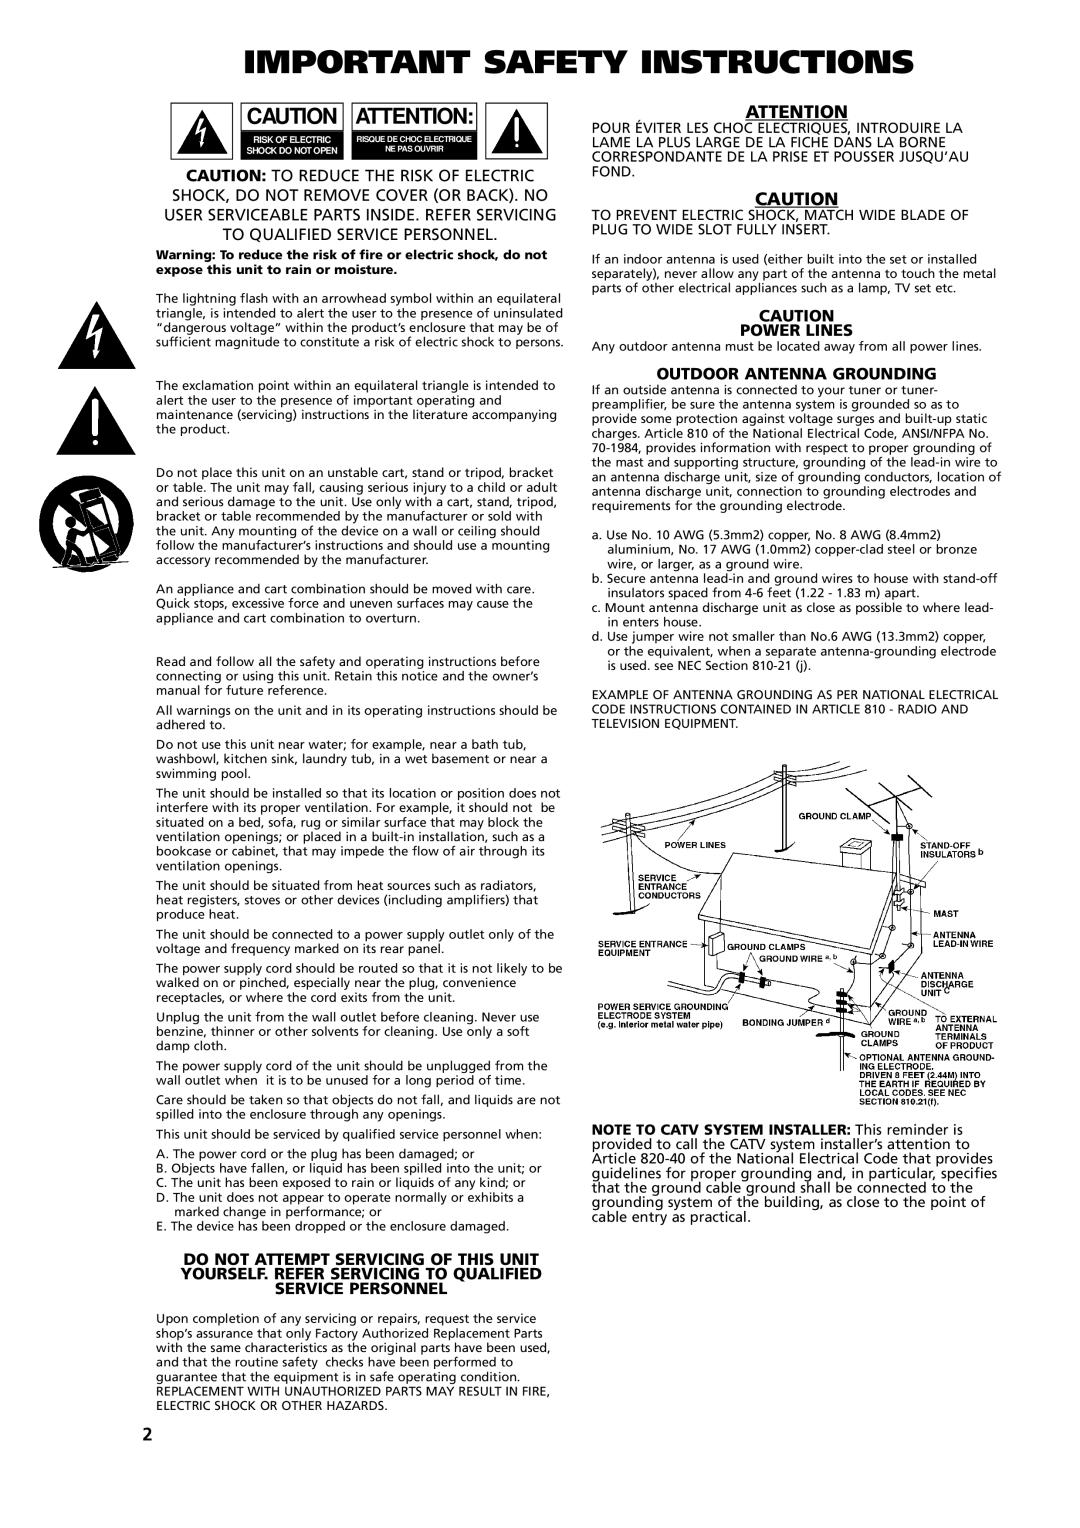 NAD S300 owner manual Important Safety Instructions, Power Lines, Outdoor Antenna Grounding 